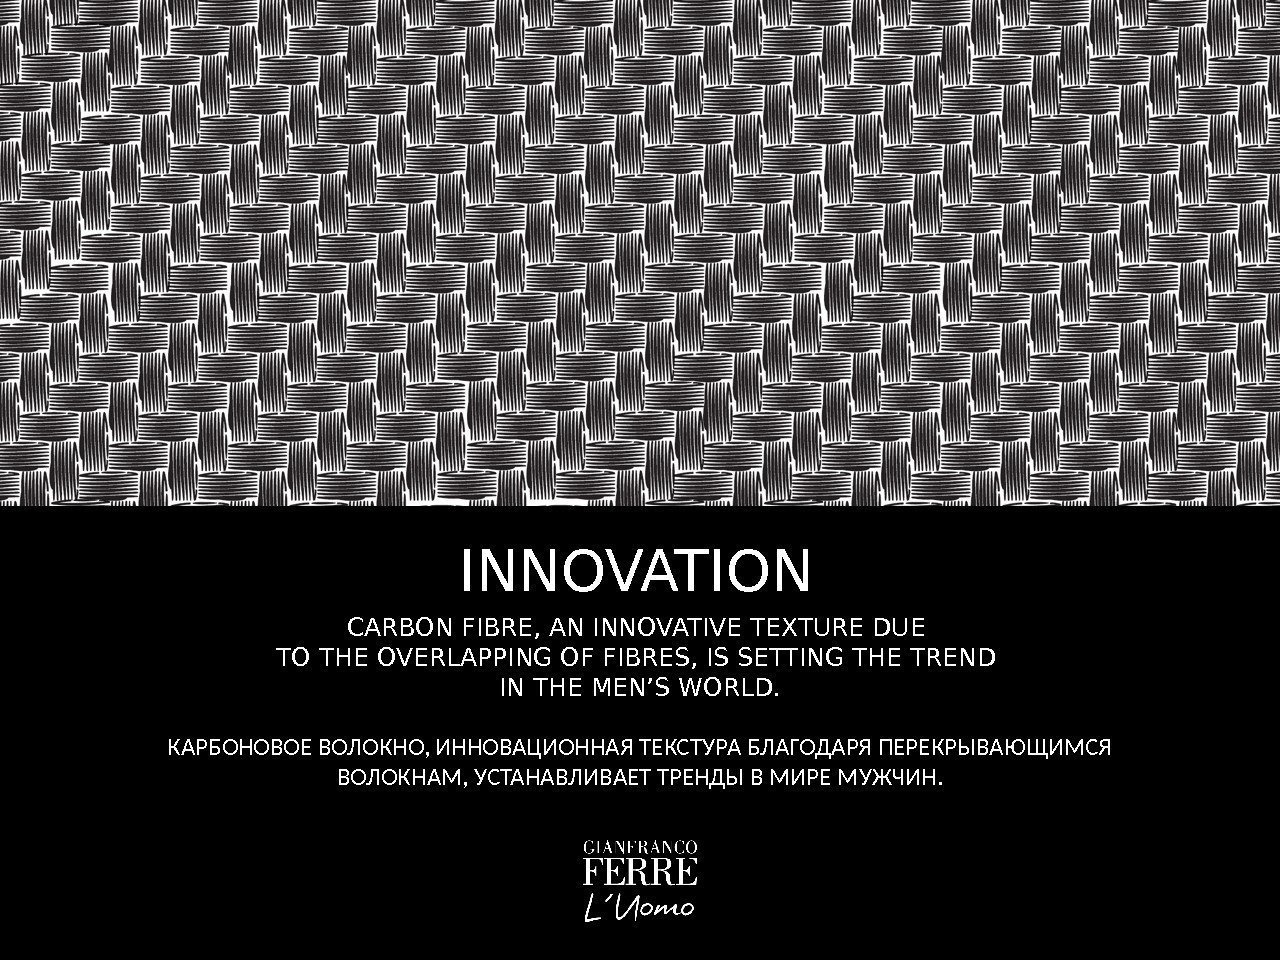 CARBON FIBRE, AN INNOVATIVE TEXTURE DUE TO THE OVERLAPPING OF FIBRES, IS SETTING THE